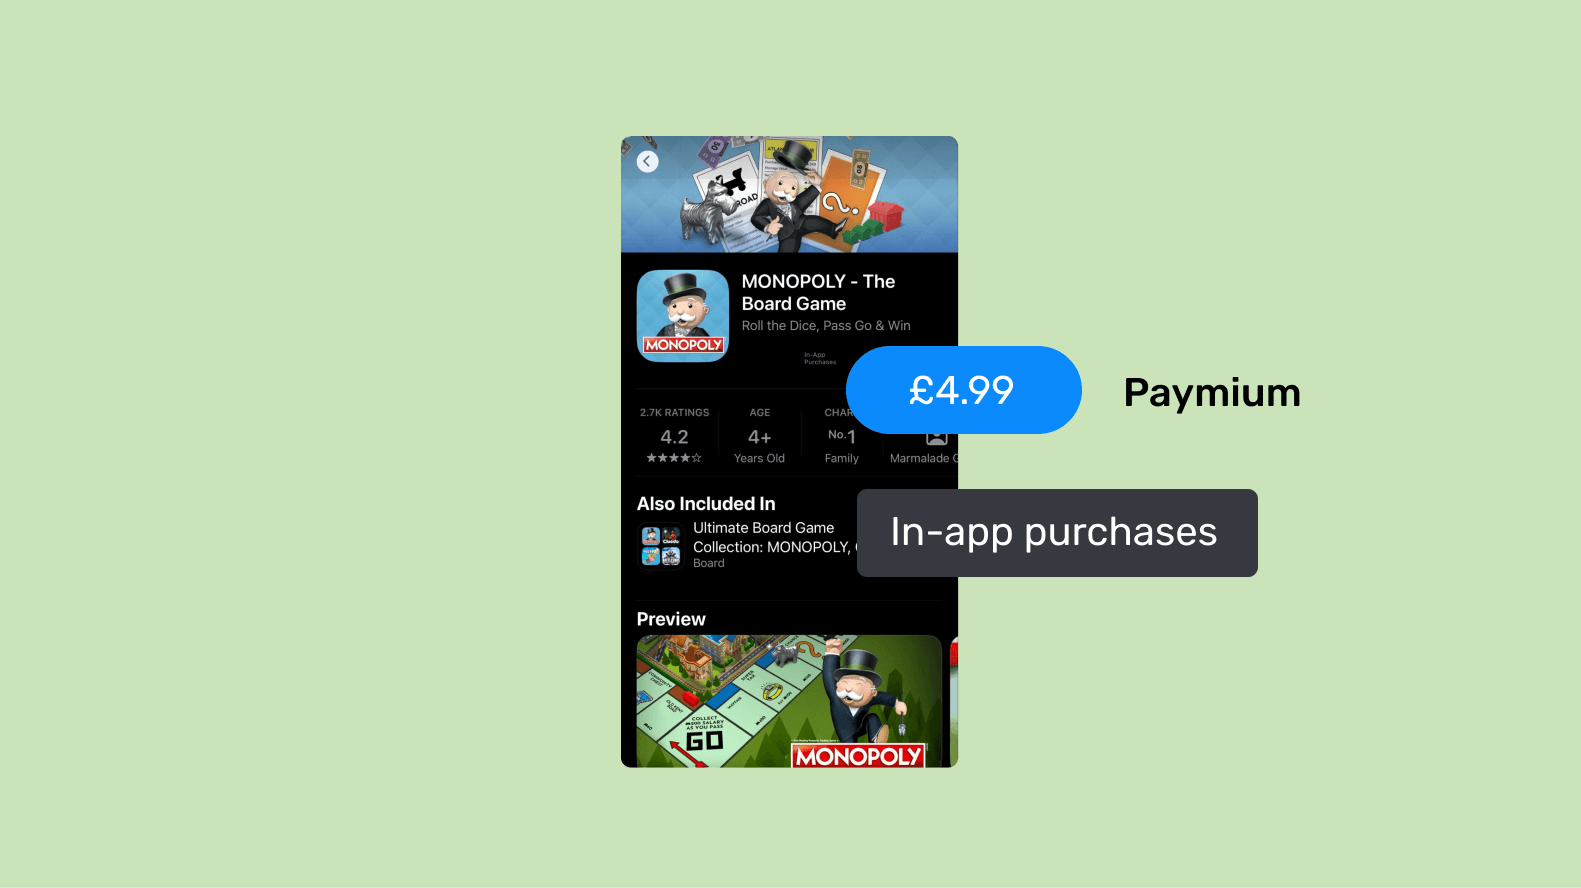 A concept of Paymium app monetization model highlighting MONOPOLY, the board game app listing